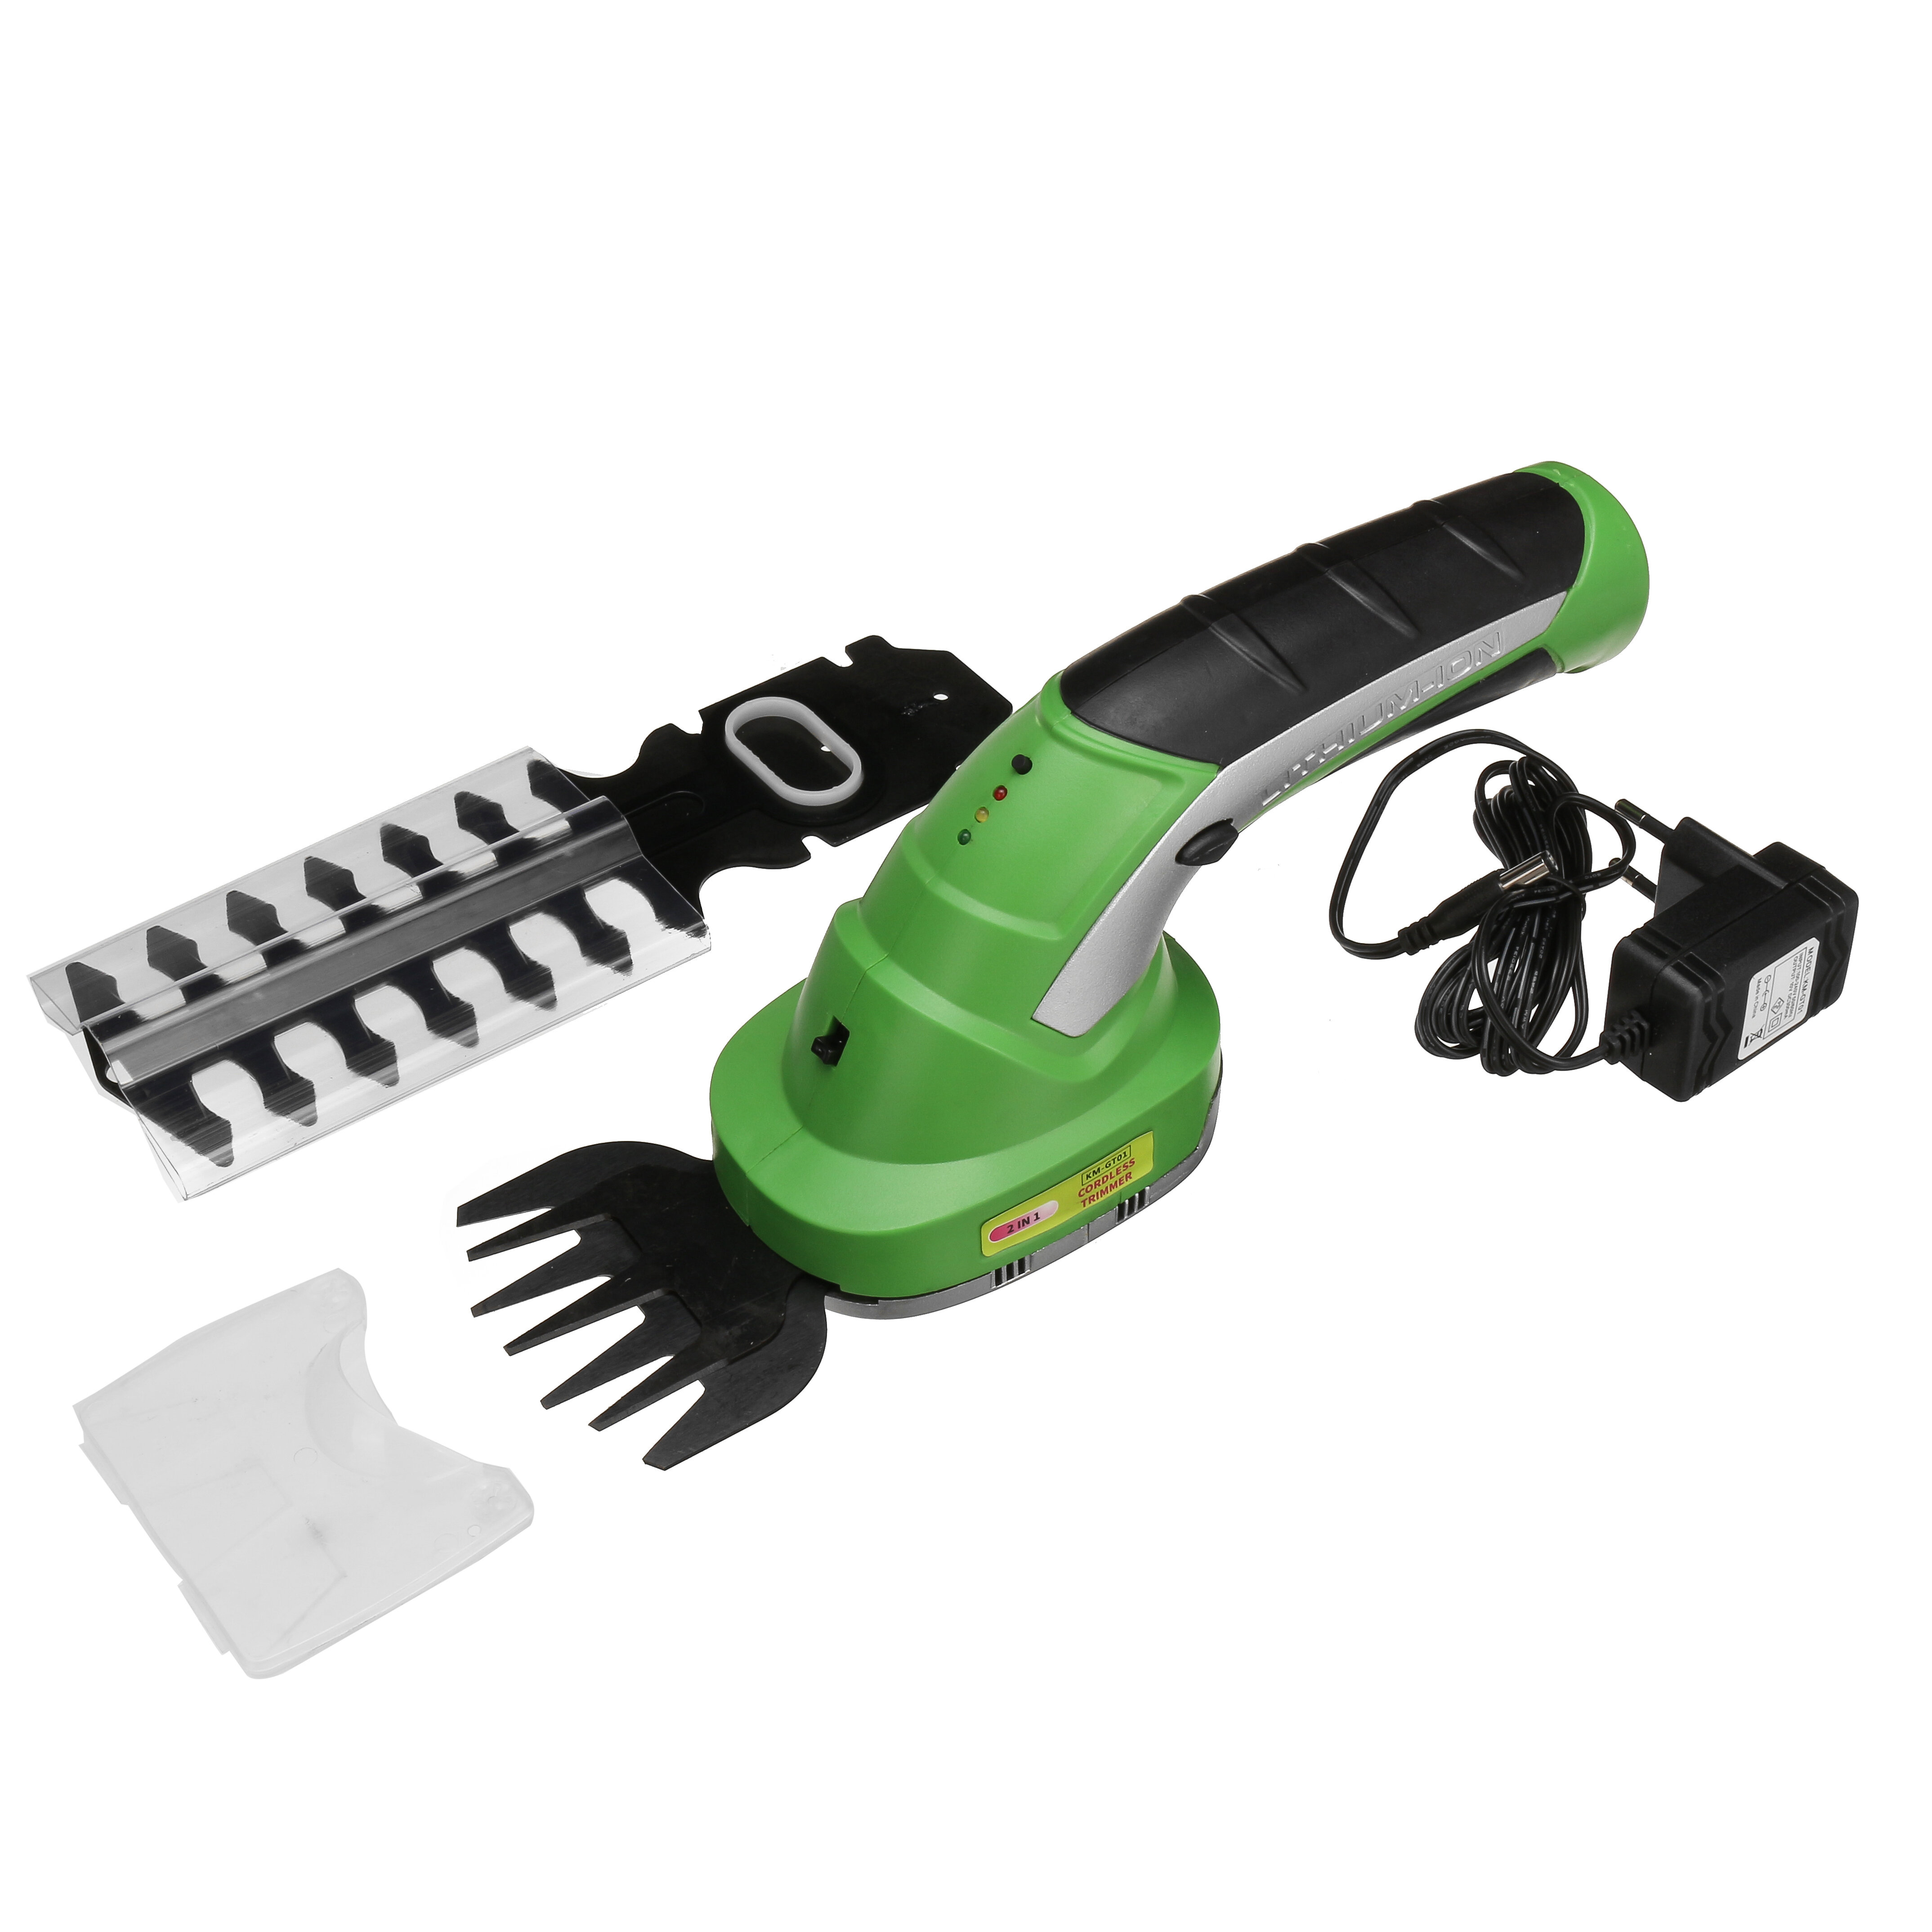 

2 in 1 Cordless Electric Hedge Trimmer Handheld Garden Rechargeable Grass Shear Cutting Tool Lawn Mower